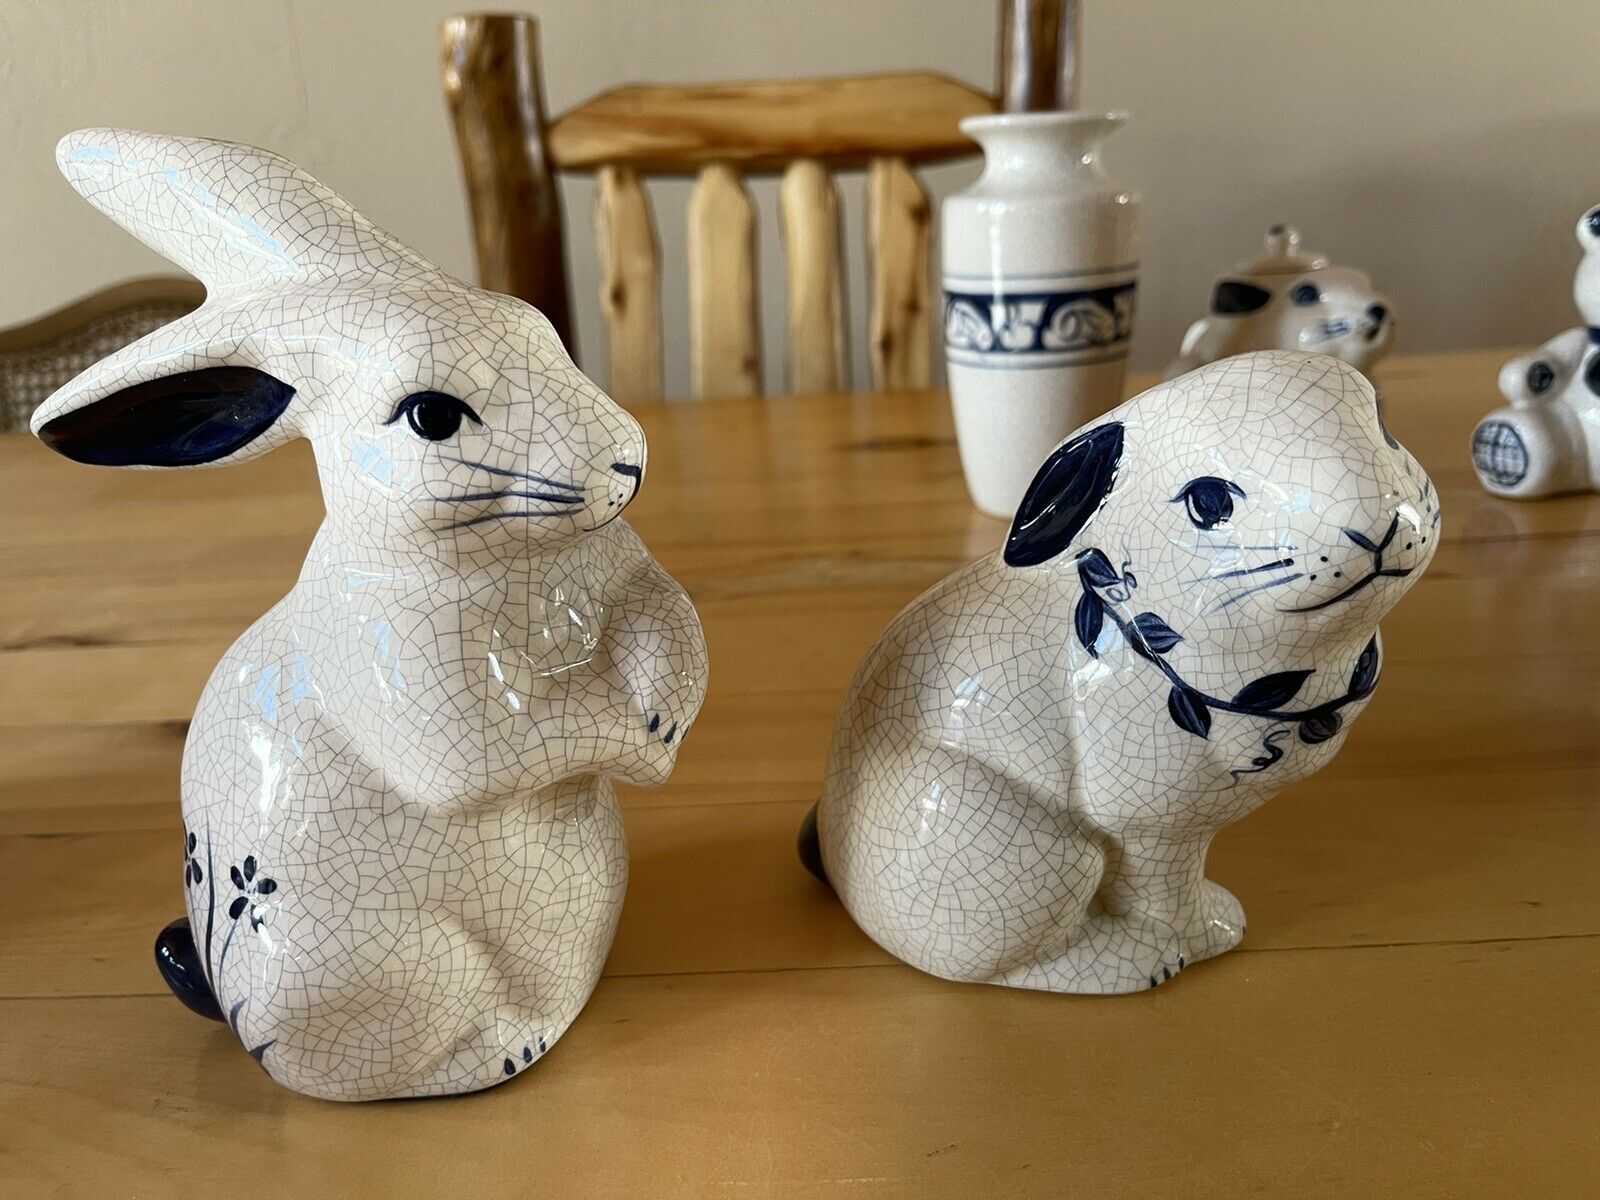 Dedham Pottery Potting Shed. Two Bunny Rabbits